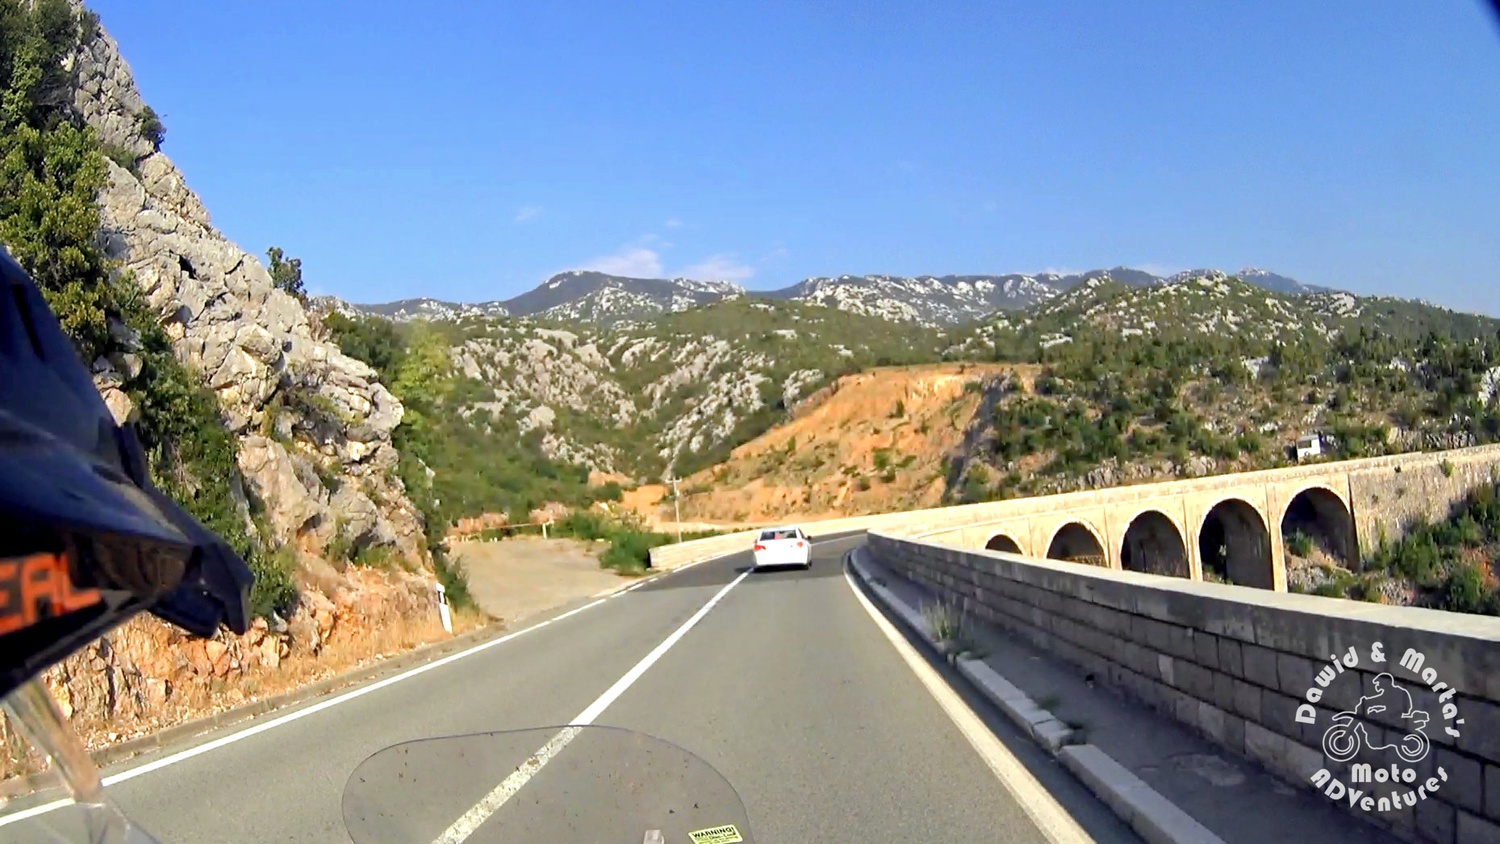 The Adriatic Highway sometimes leaves the sea coastline and meanders between the mountains